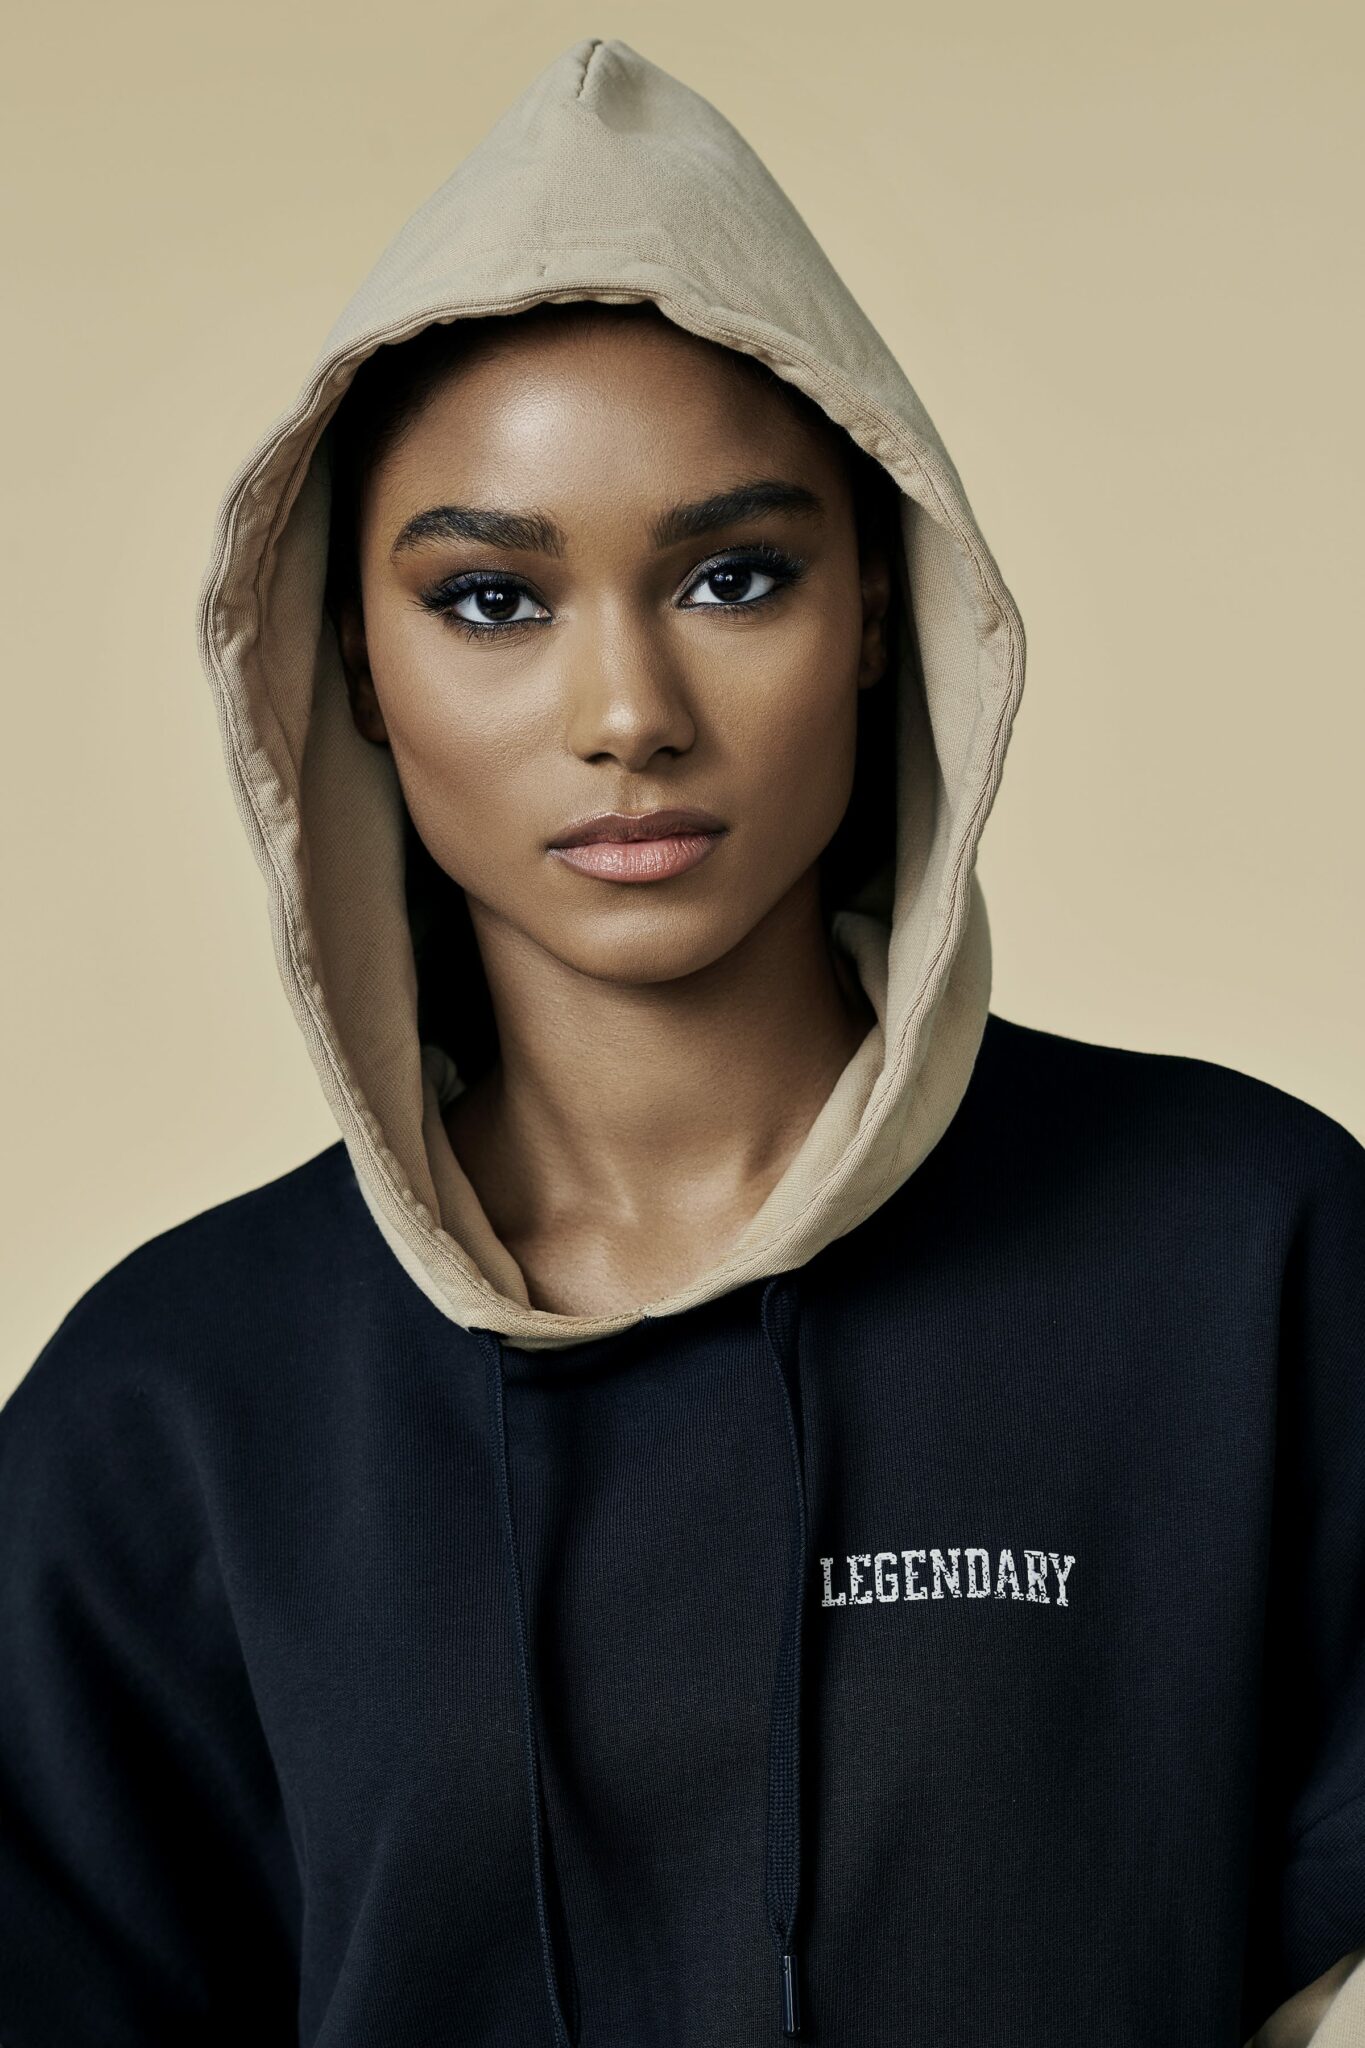 PUMA Launch June Ambrose Debut Collection In London | Sustain Health ...